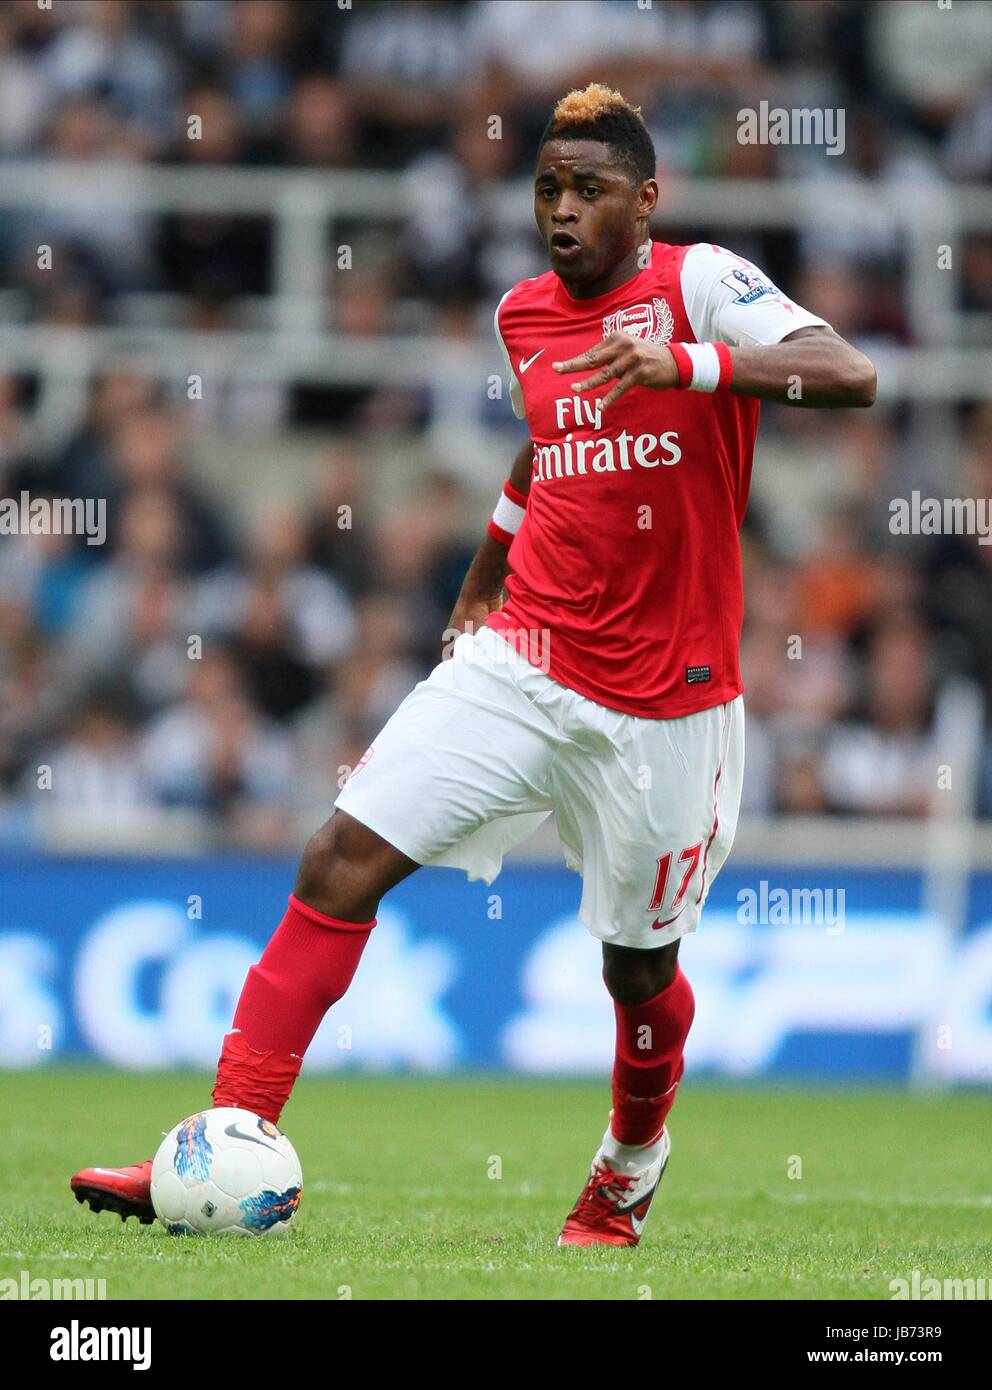 ALEX SONG ARSENAL FC ARSENAL FC ST JAMES PARK NEWCASTLE ENGLAND 13 August 2011 Stock Photo